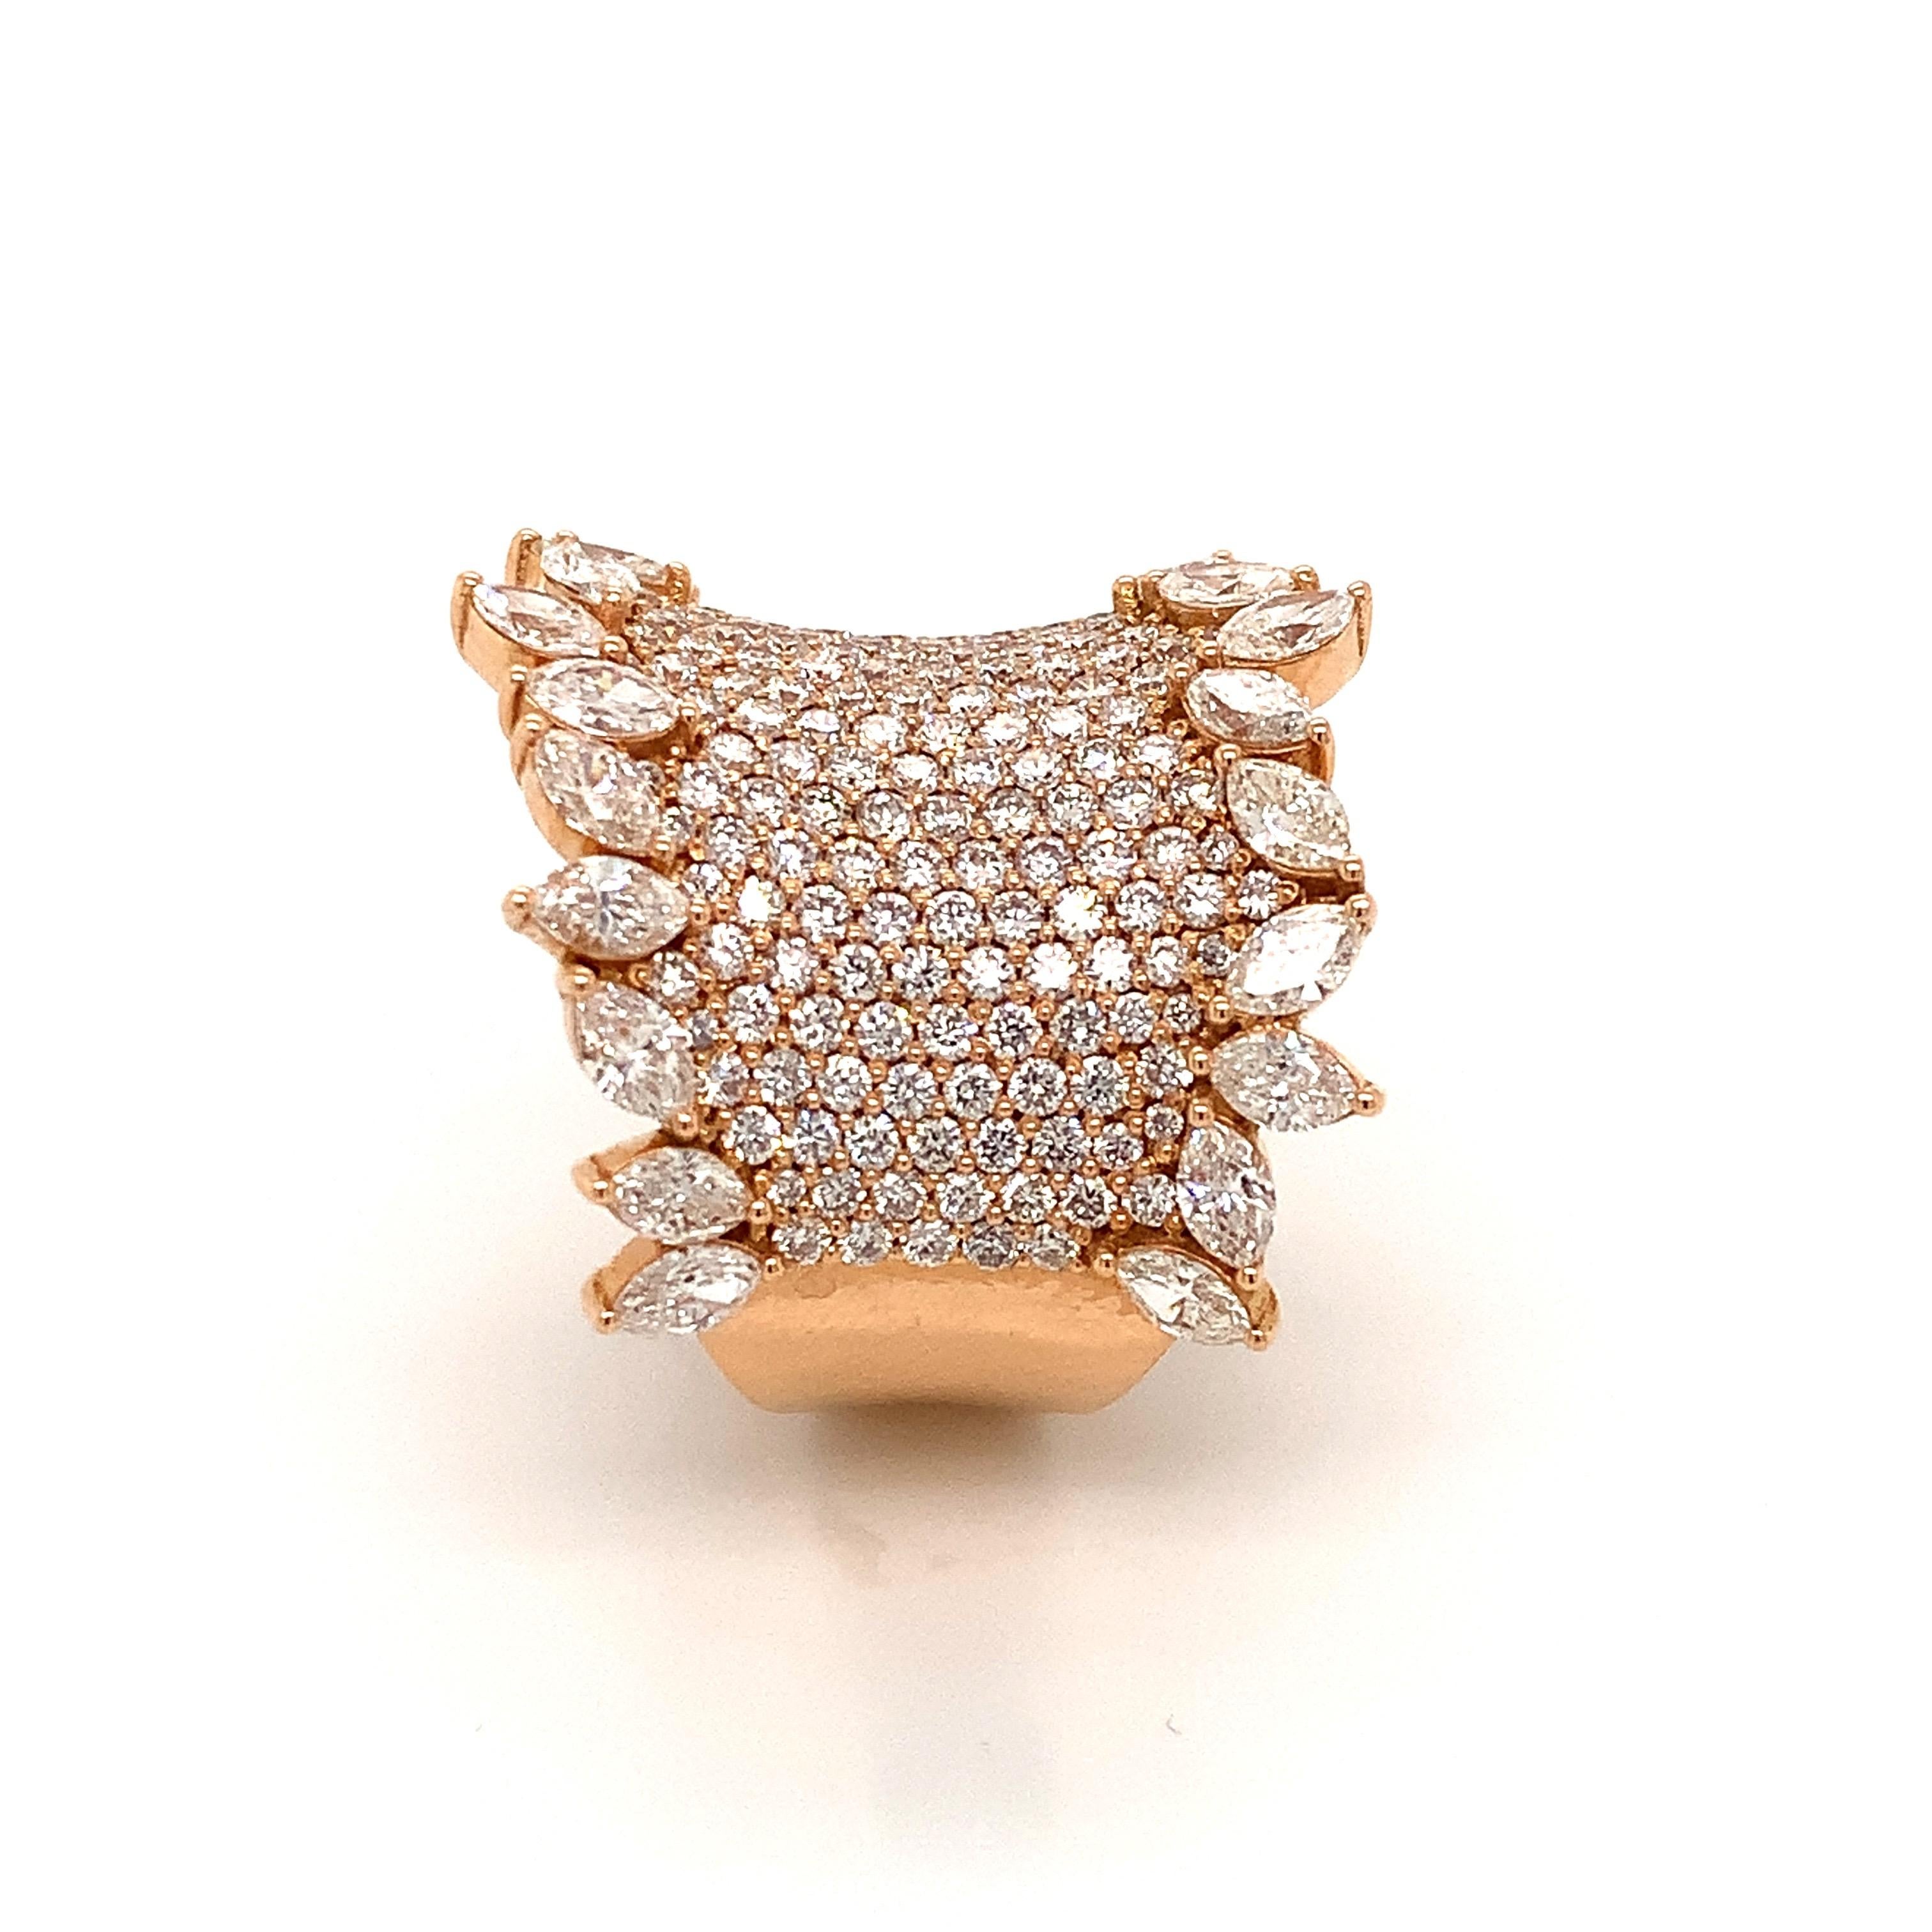 OWN Your Story 18K Rose Gold Brilliant and Marquise Diamond Edged Sheath Cocktail Ring. Fresh take on marquis for today's modern woman. 

OWN Your Story brings its 3 generations of family tradition and unparalleled experience with 18K gold,